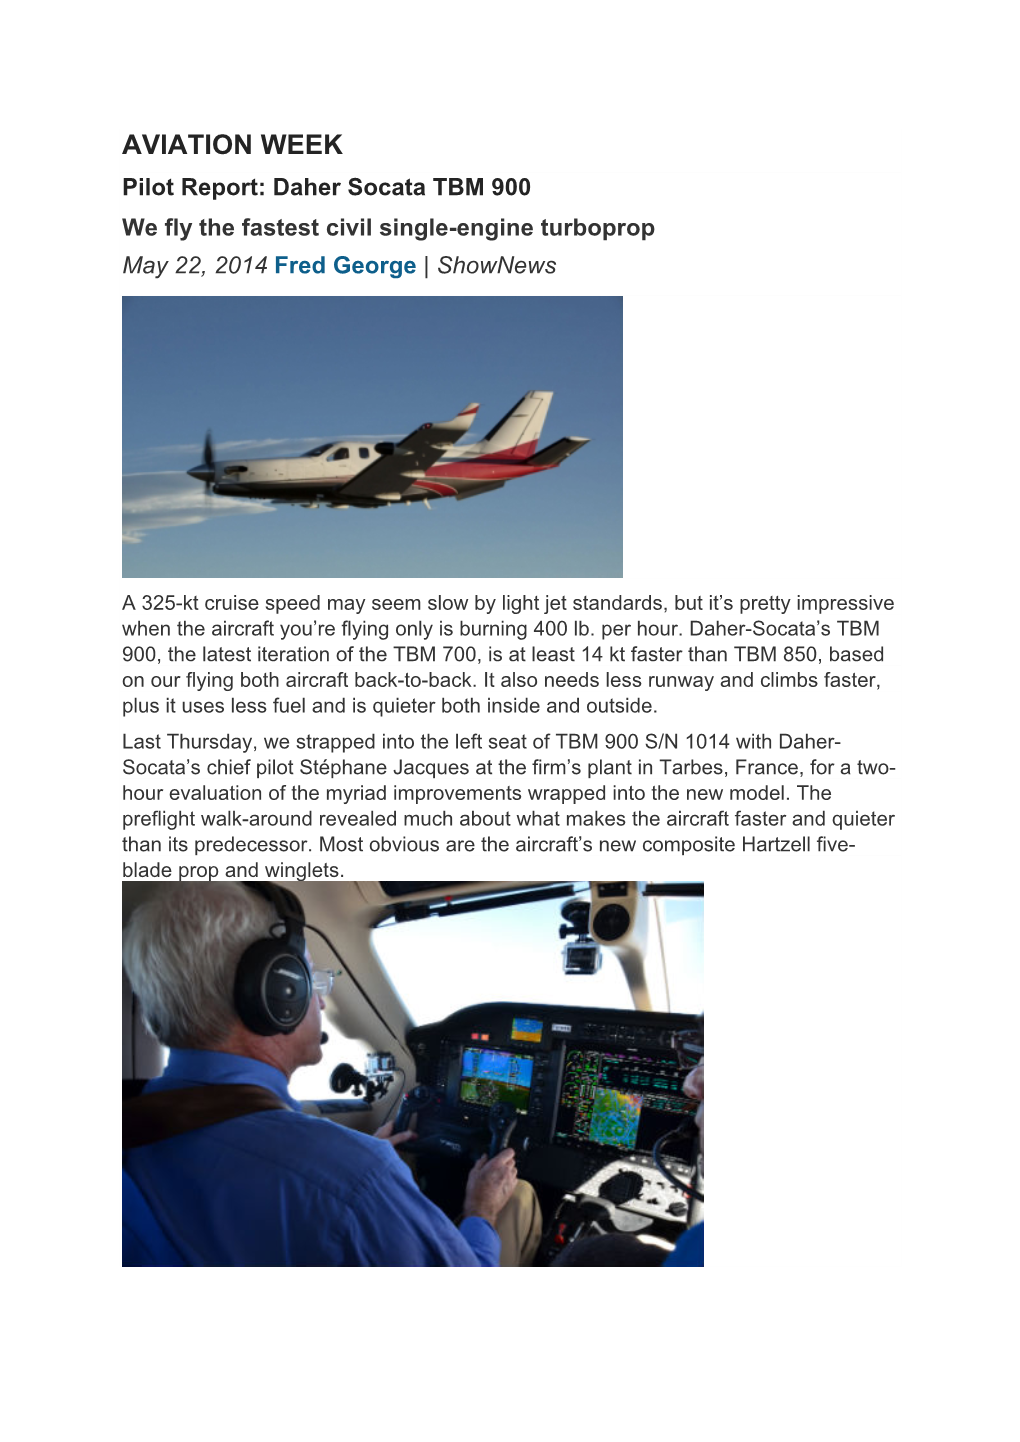 AVIATION WEEK Pilot Report: Daher Socata TBM 900 We Fly the Fastest Civil Single-Engine Turboprop May 22, 2014 Fred George | Shownews